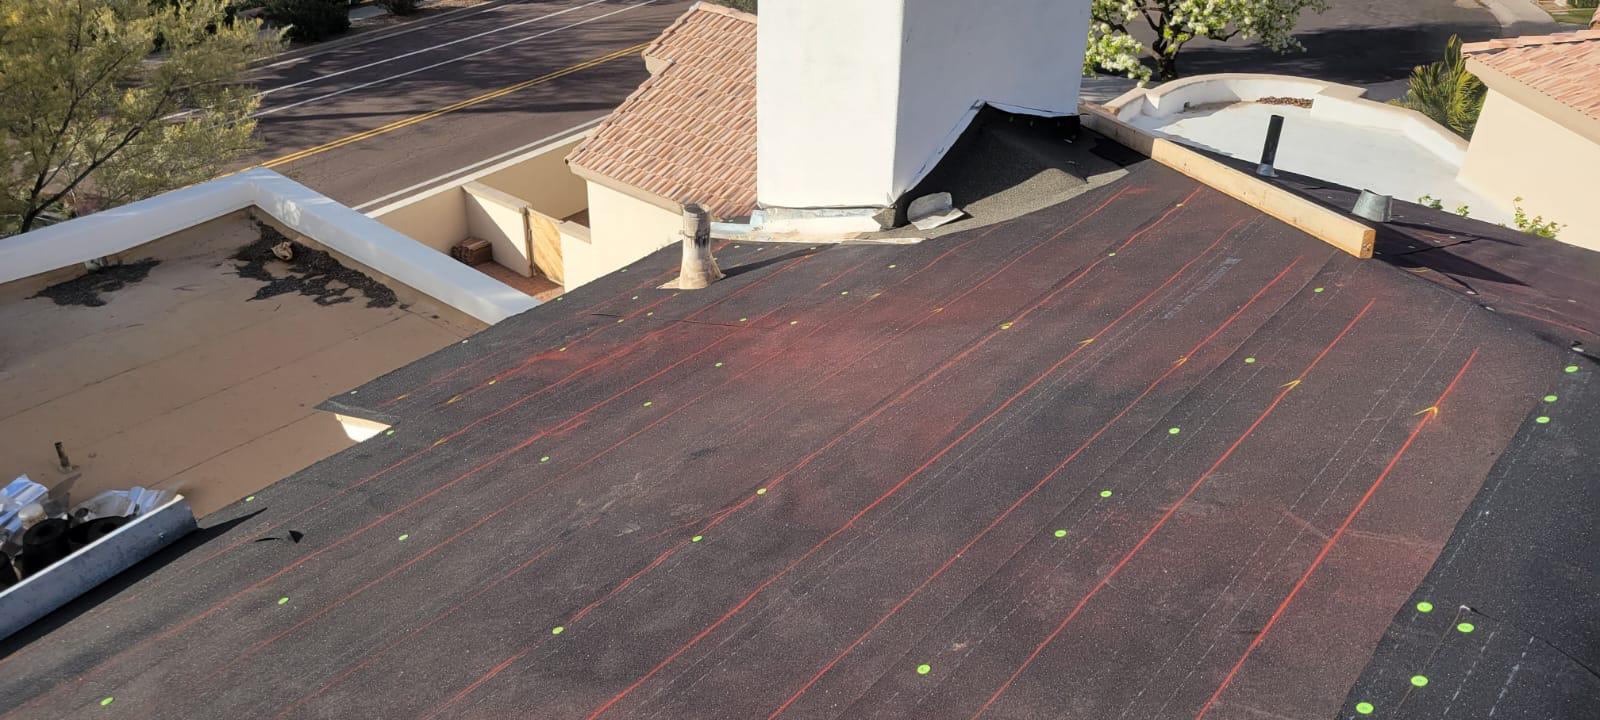 Installation of new underlayment on a Whisper Rock home's roof, a crucial step in Behmer's tile re-felt process.